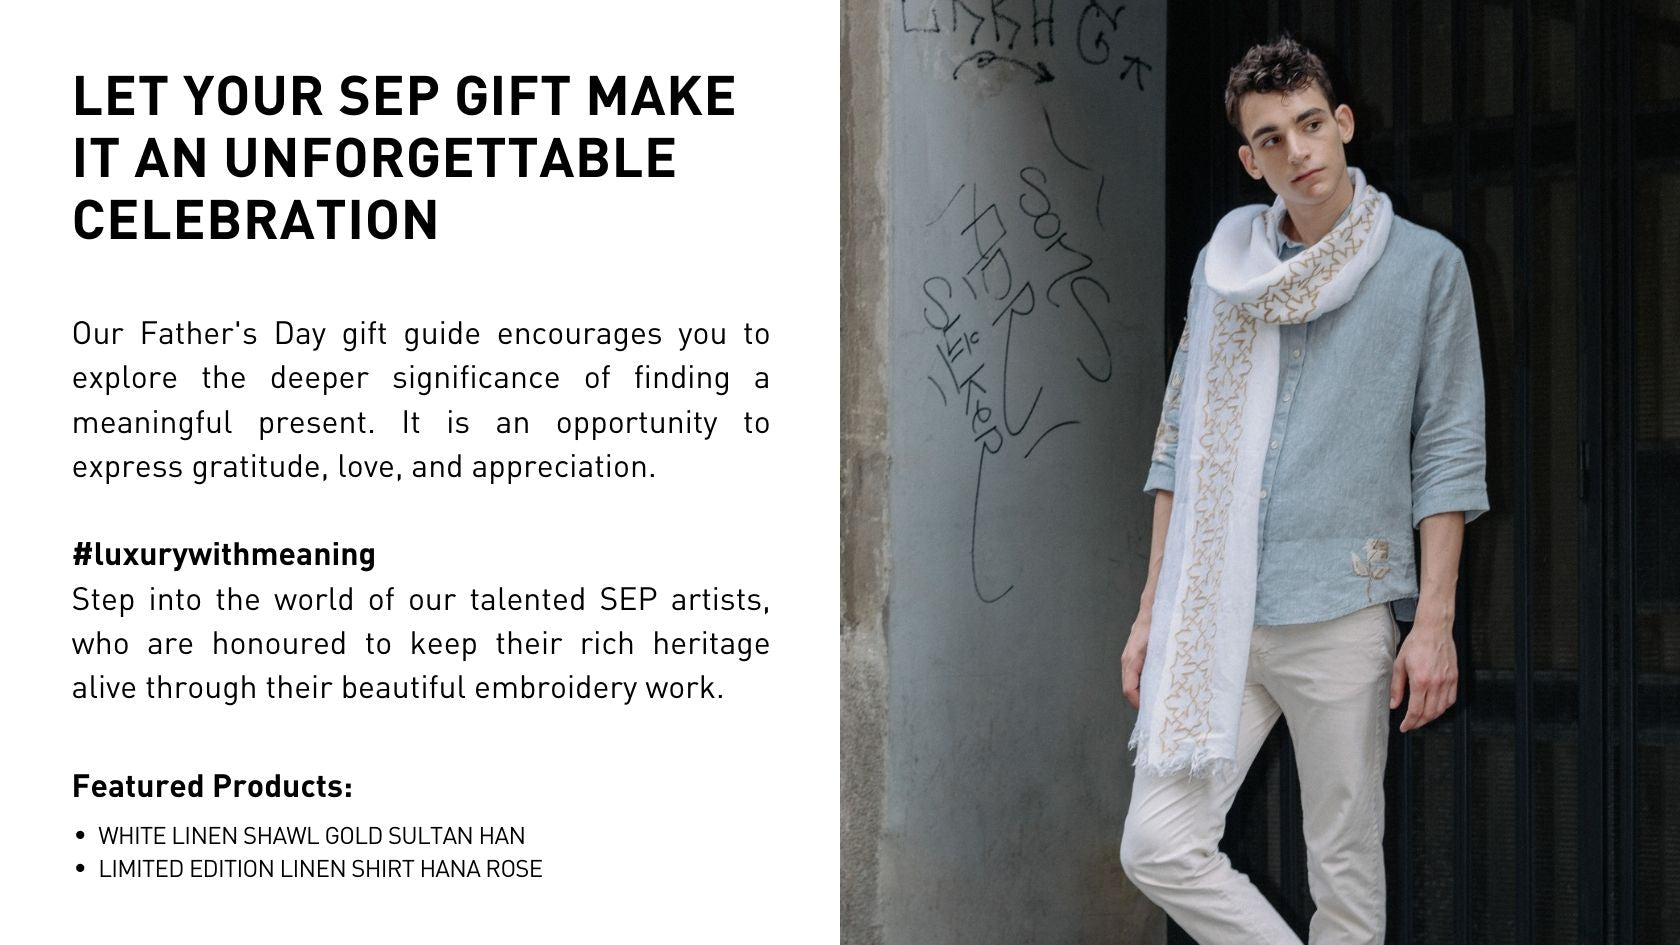 Our Father's Day gift guide encourages you to explore the deeper significance of finding a meaningful present. It is an opportunity to express gratitude, love, and appreciation.  #luxurywithmeaning Step into the world of our talented SEP artists, who are honoured to keep their rich heritage alive through their beautiful embroidery work.